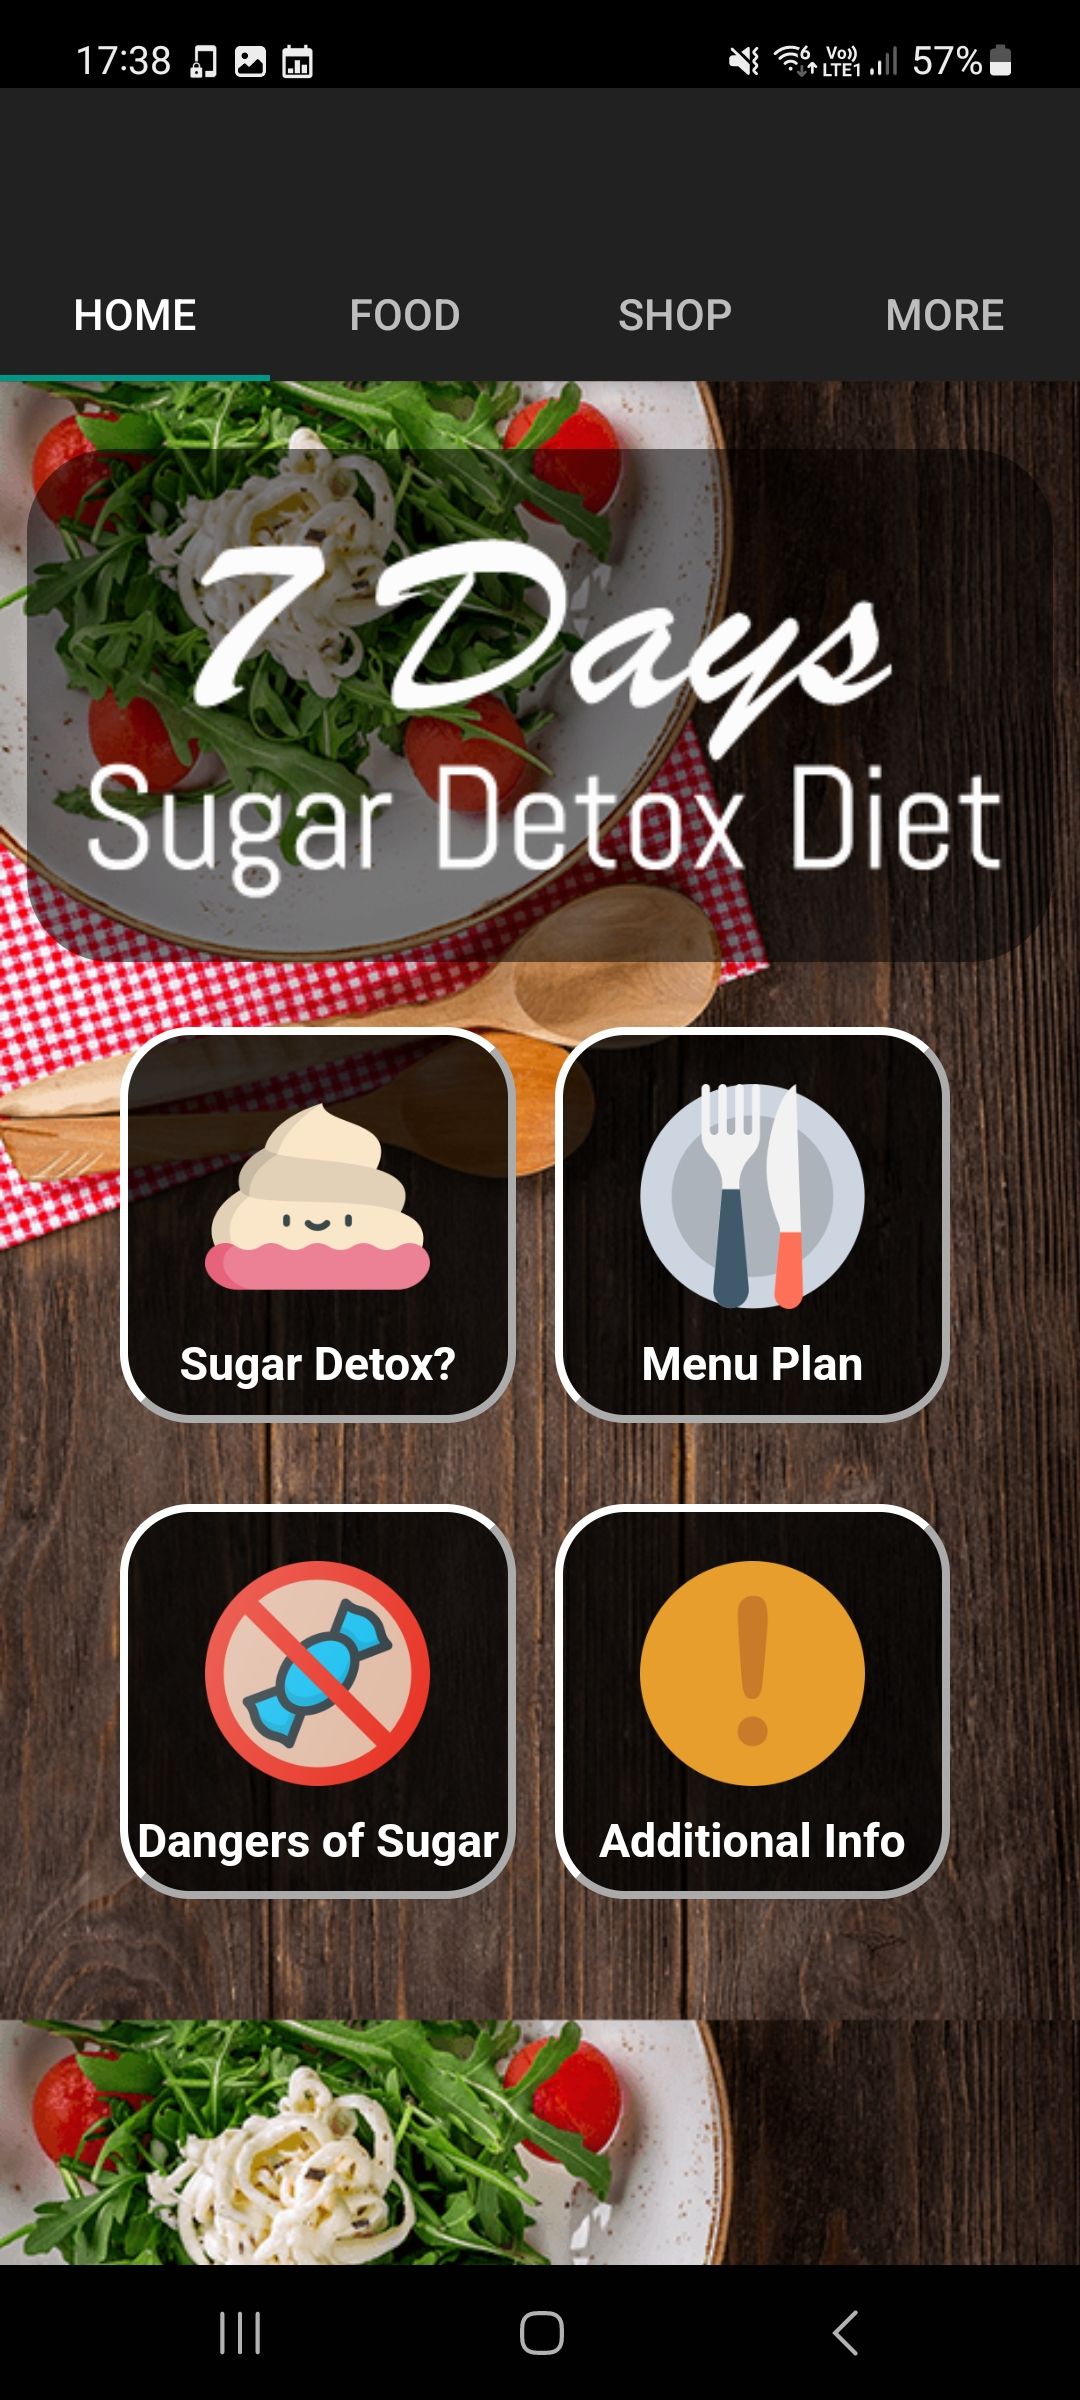 5 Challenging Apps to Limit Sugar Intake